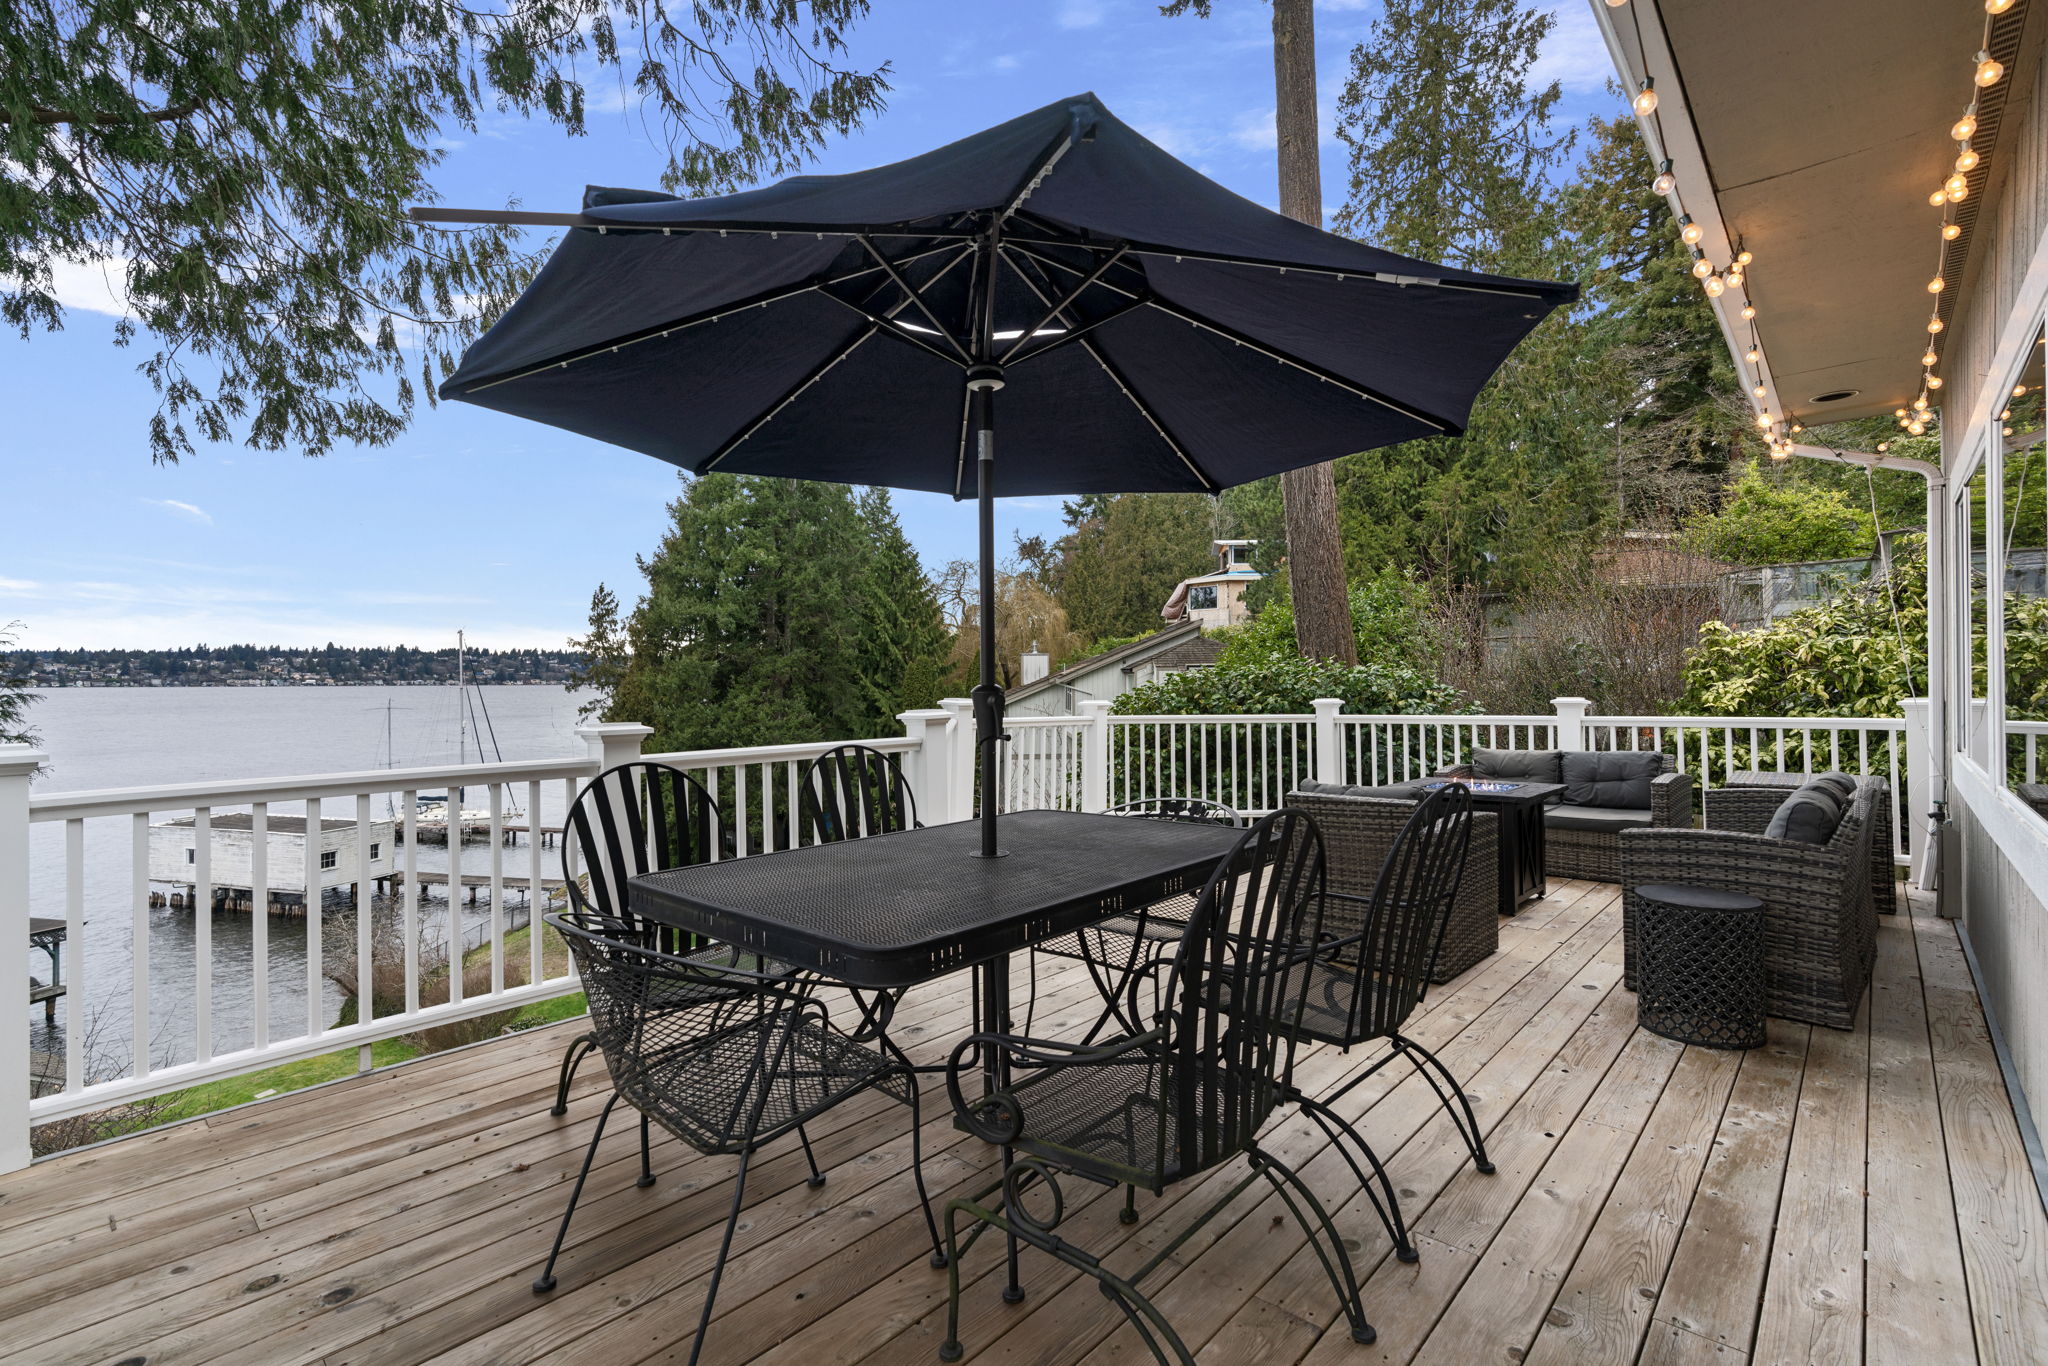 Host the ultimate barbecue with multiple levels of decks.